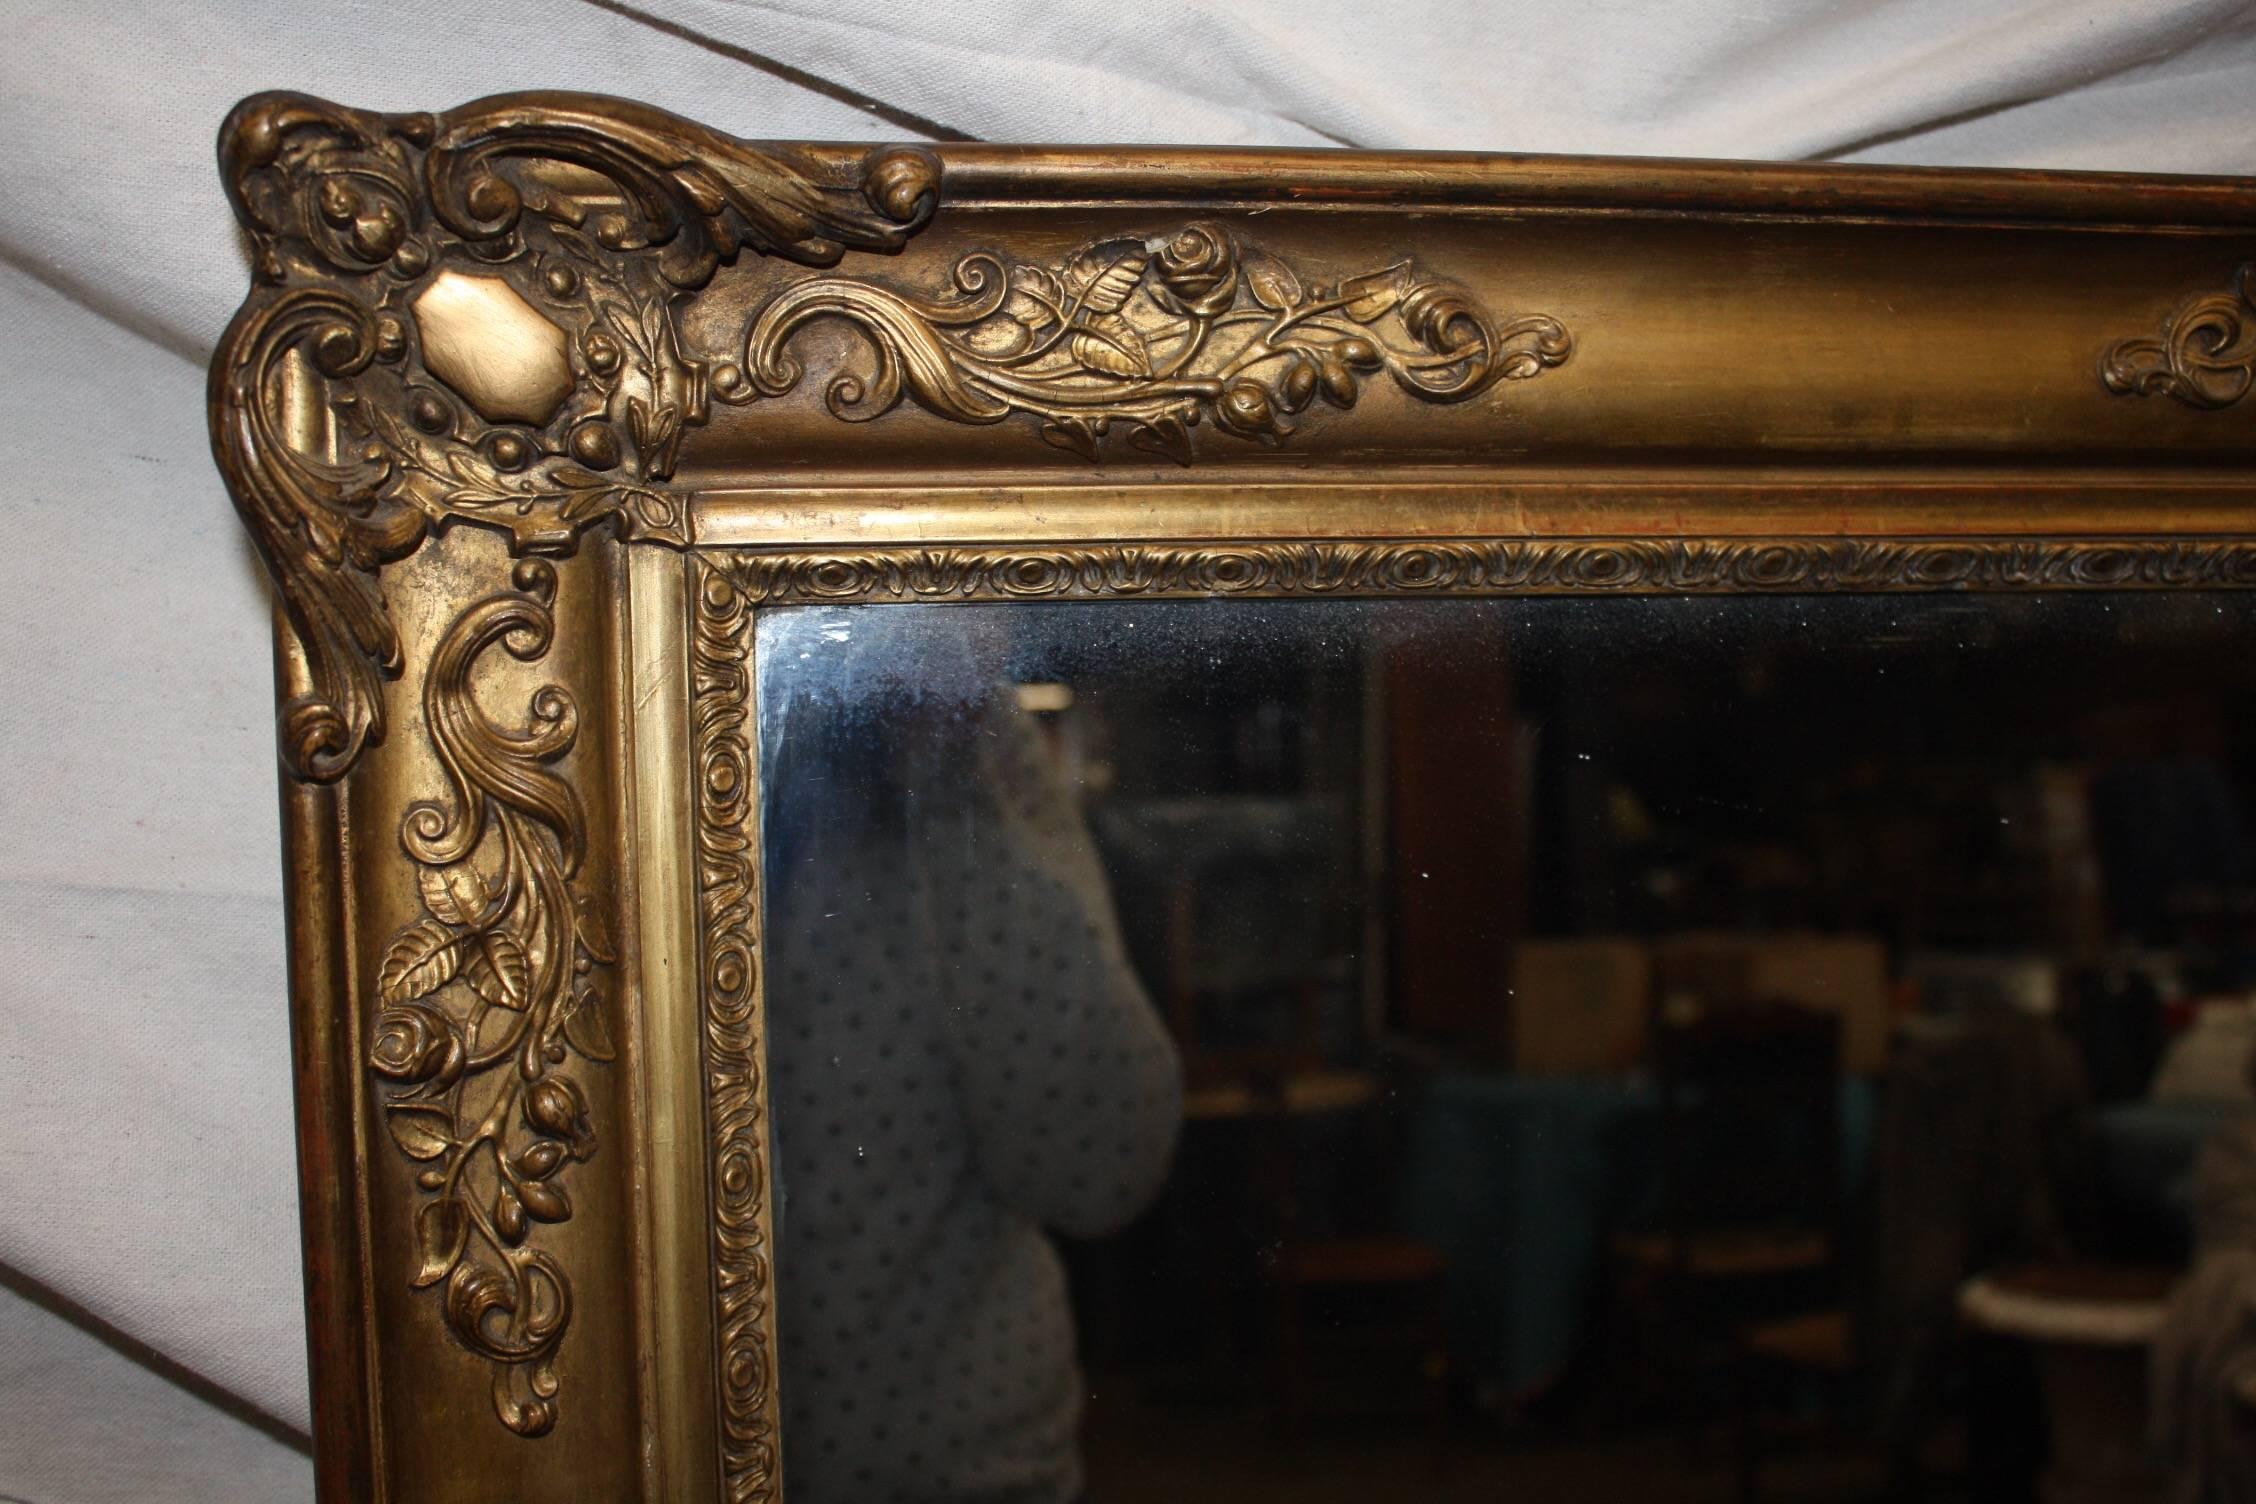 Charming 19th Century French Mirror In Good Condition For Sale In Stockbridge, GA